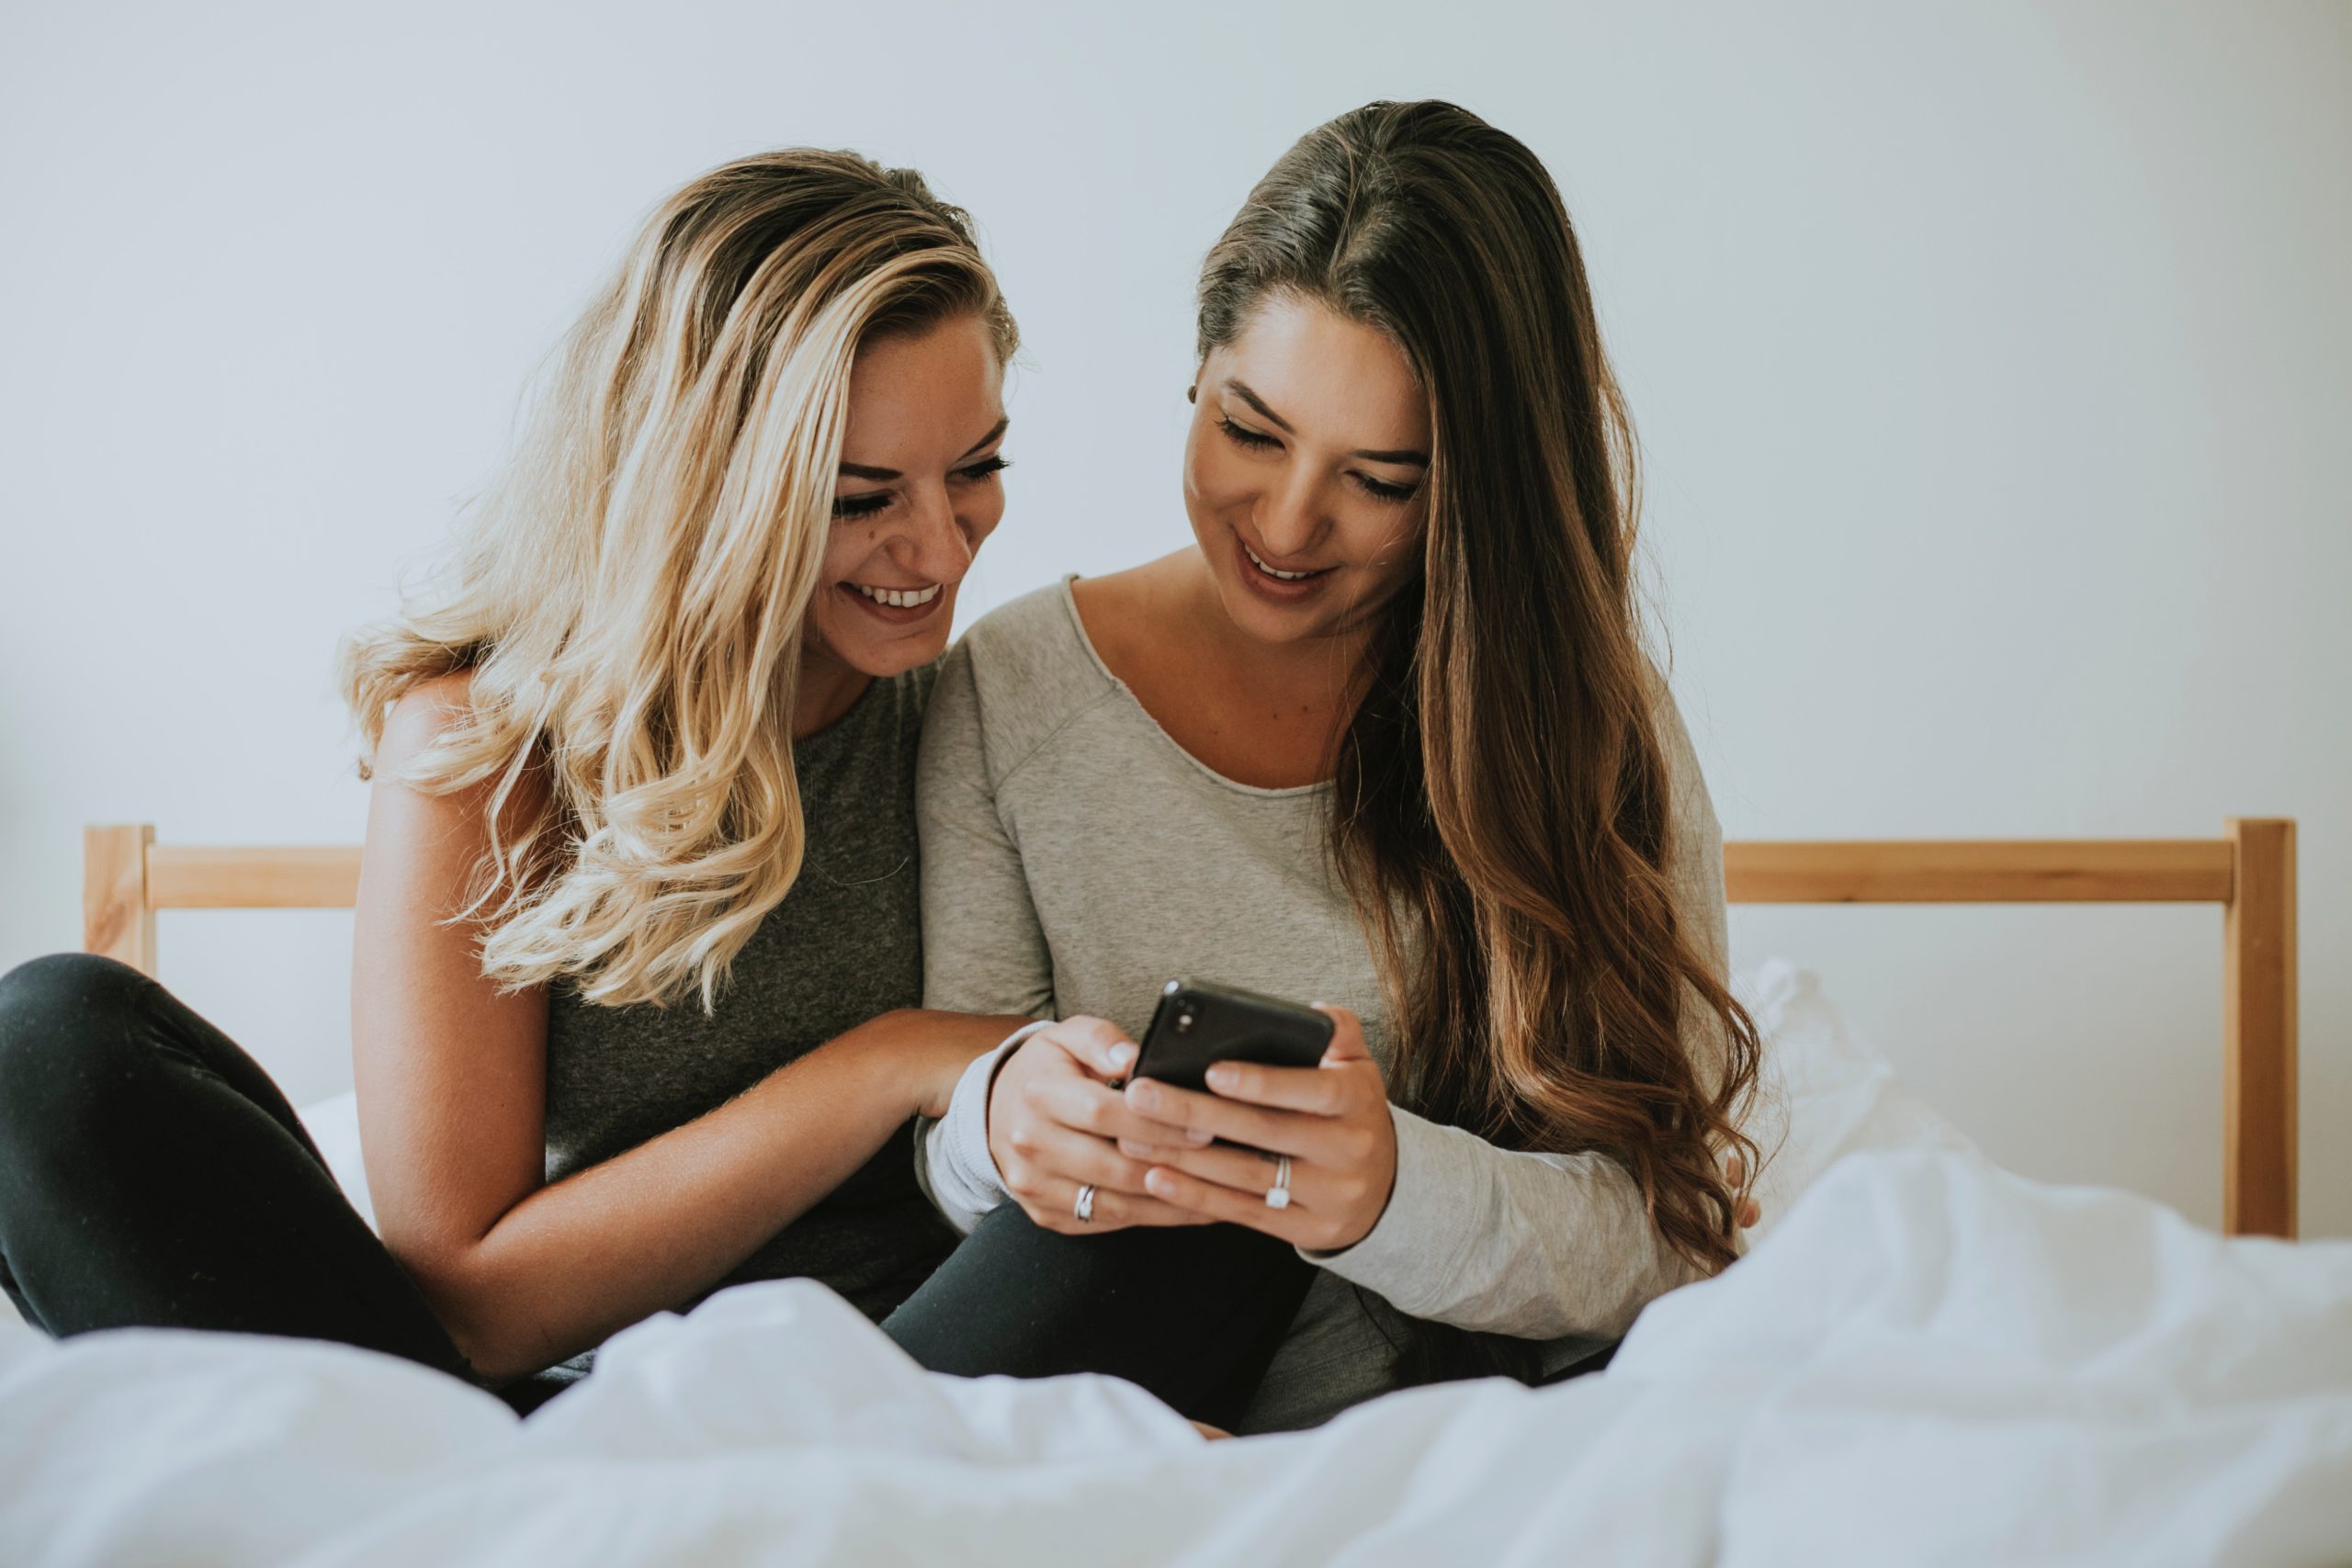 Woman sharing her newsfeed with her friend